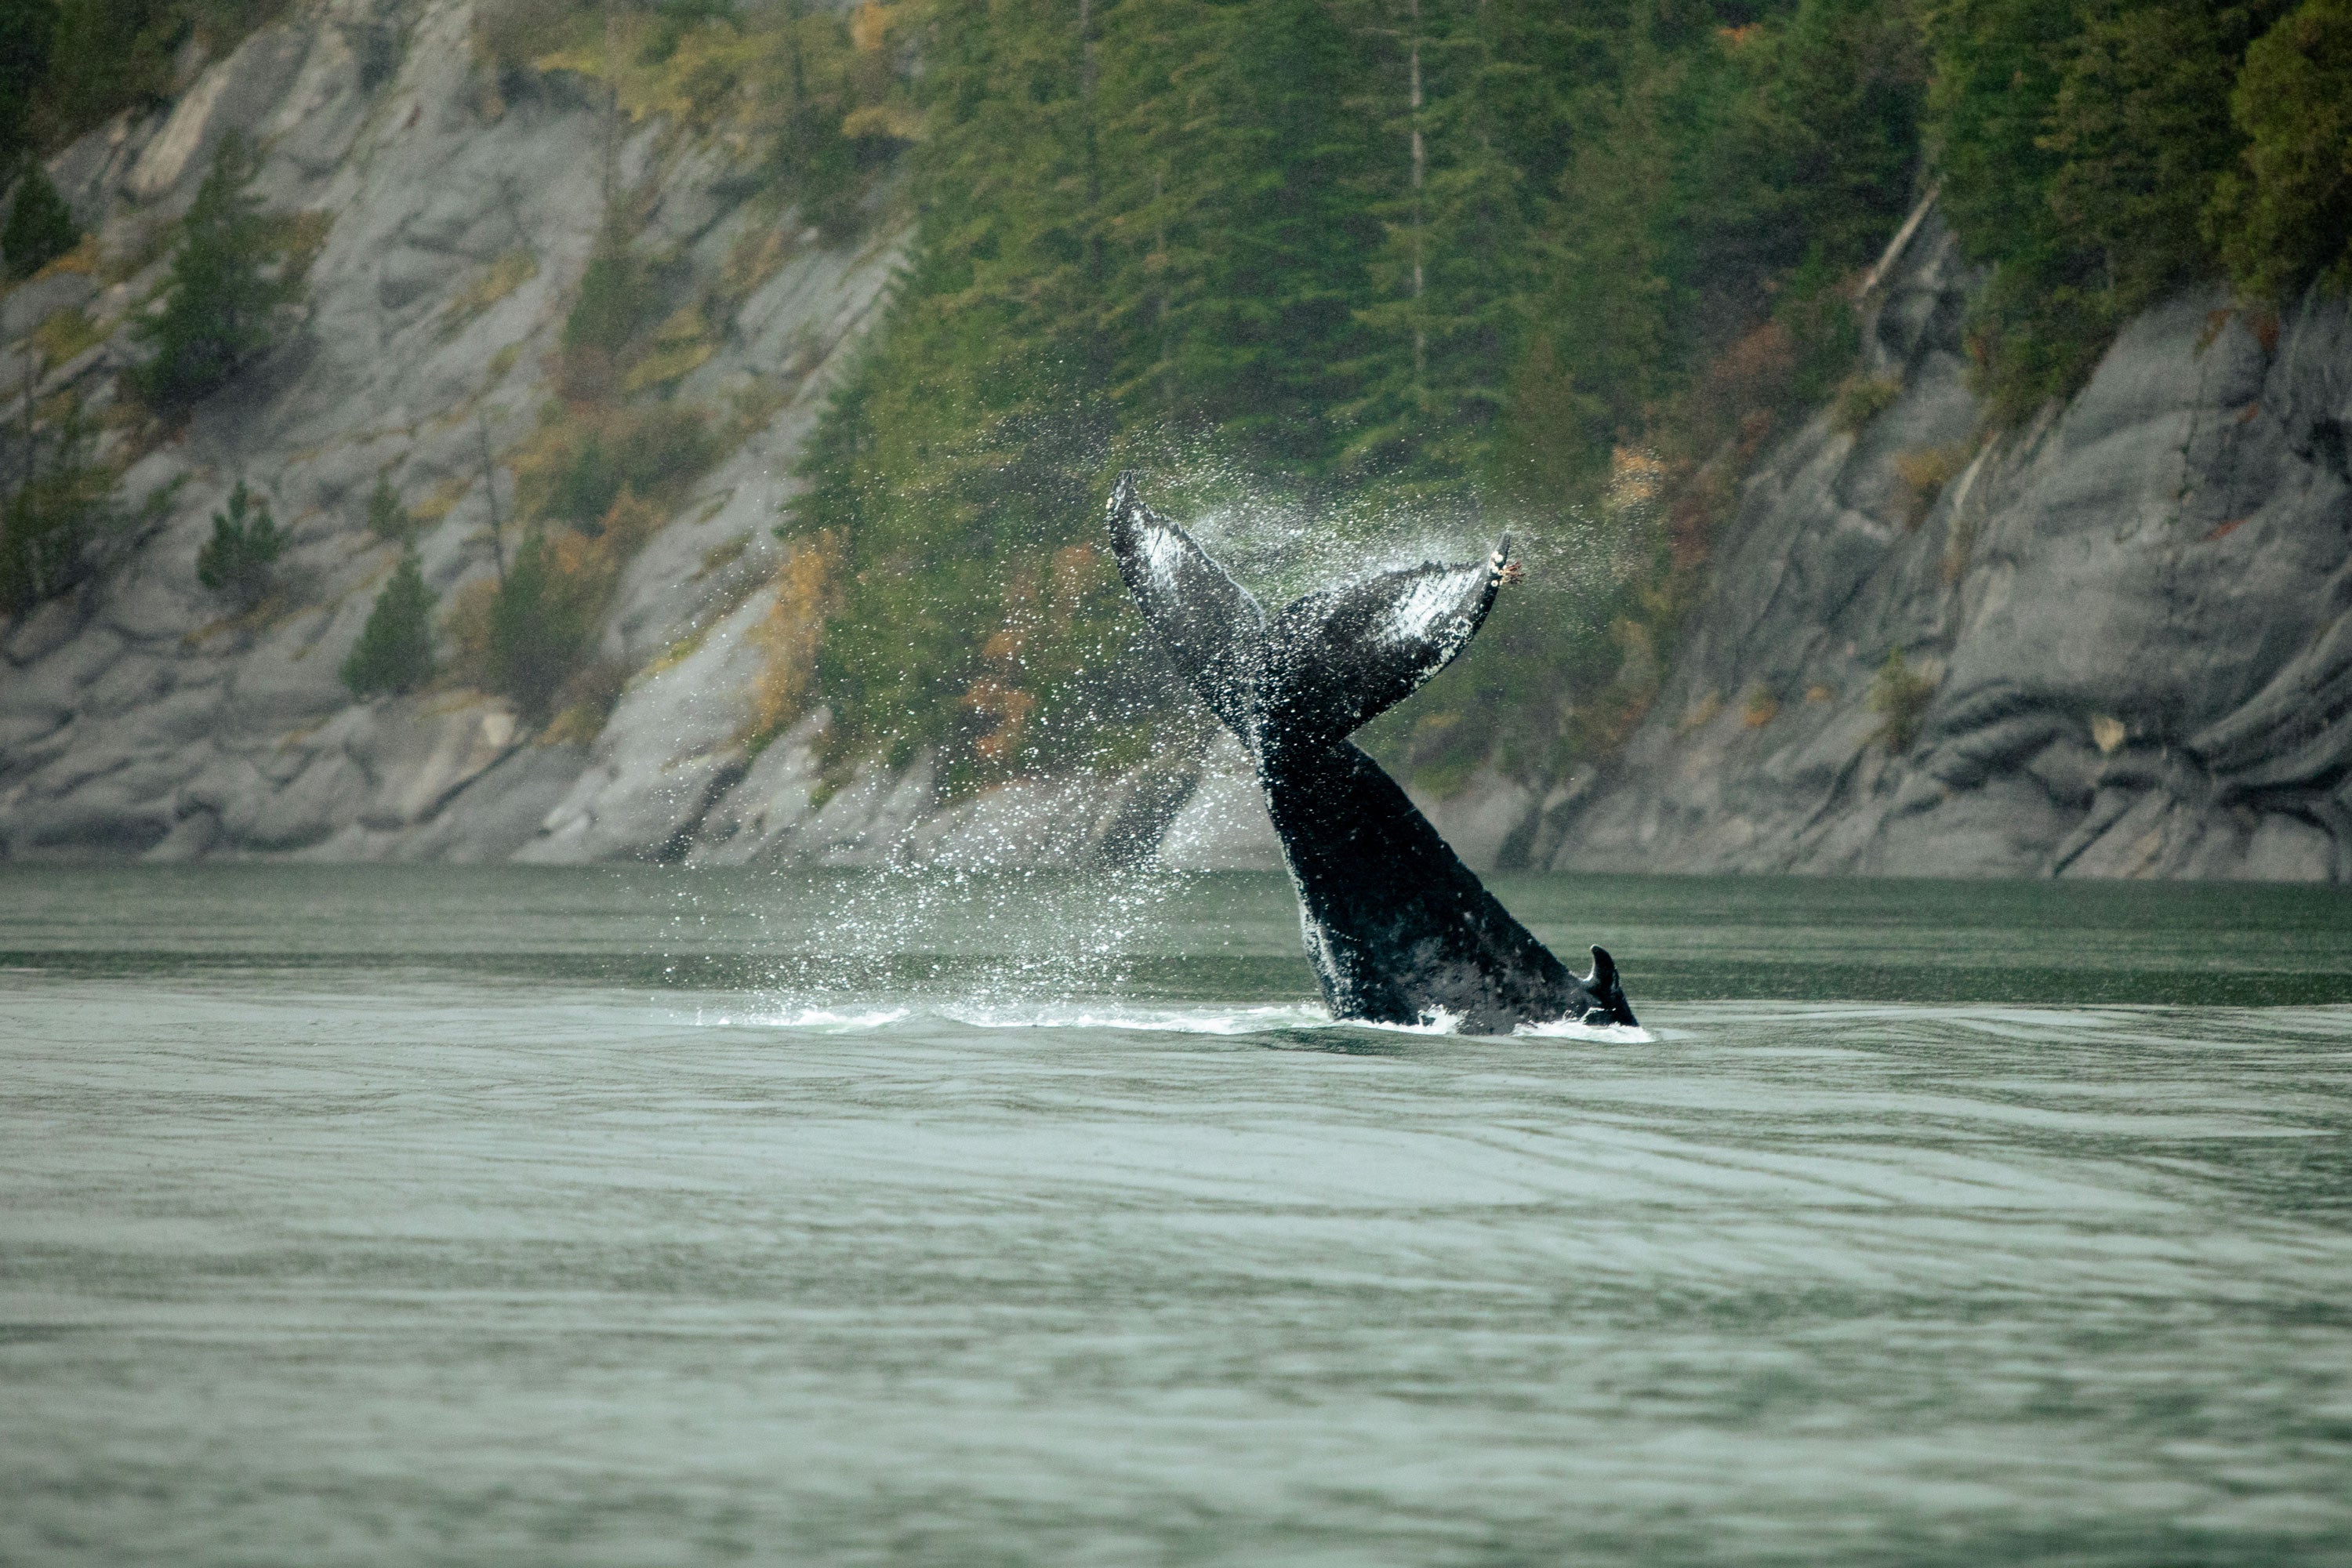 A humpback whale splashing its tailfin out of the water with a backdrop of mountainous terrain and pine trees